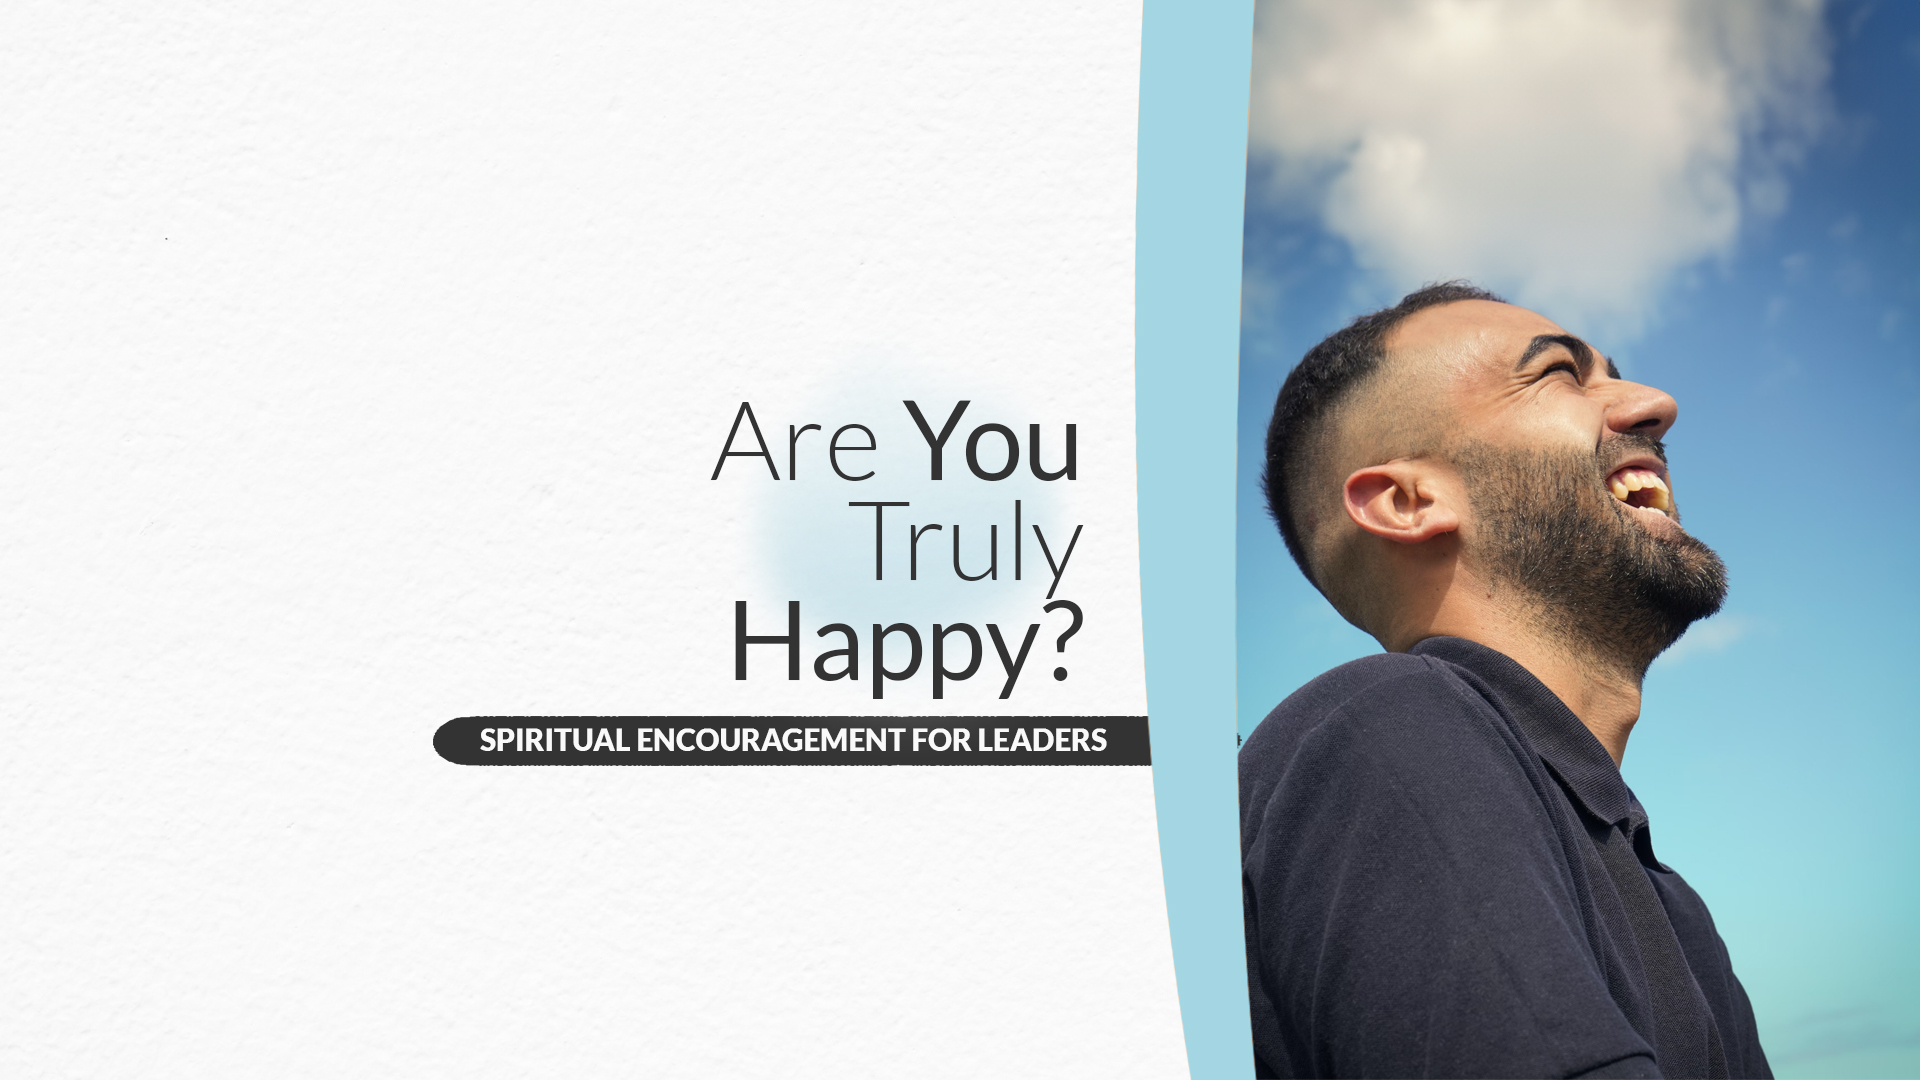 Featured image for “Are You Happy?”